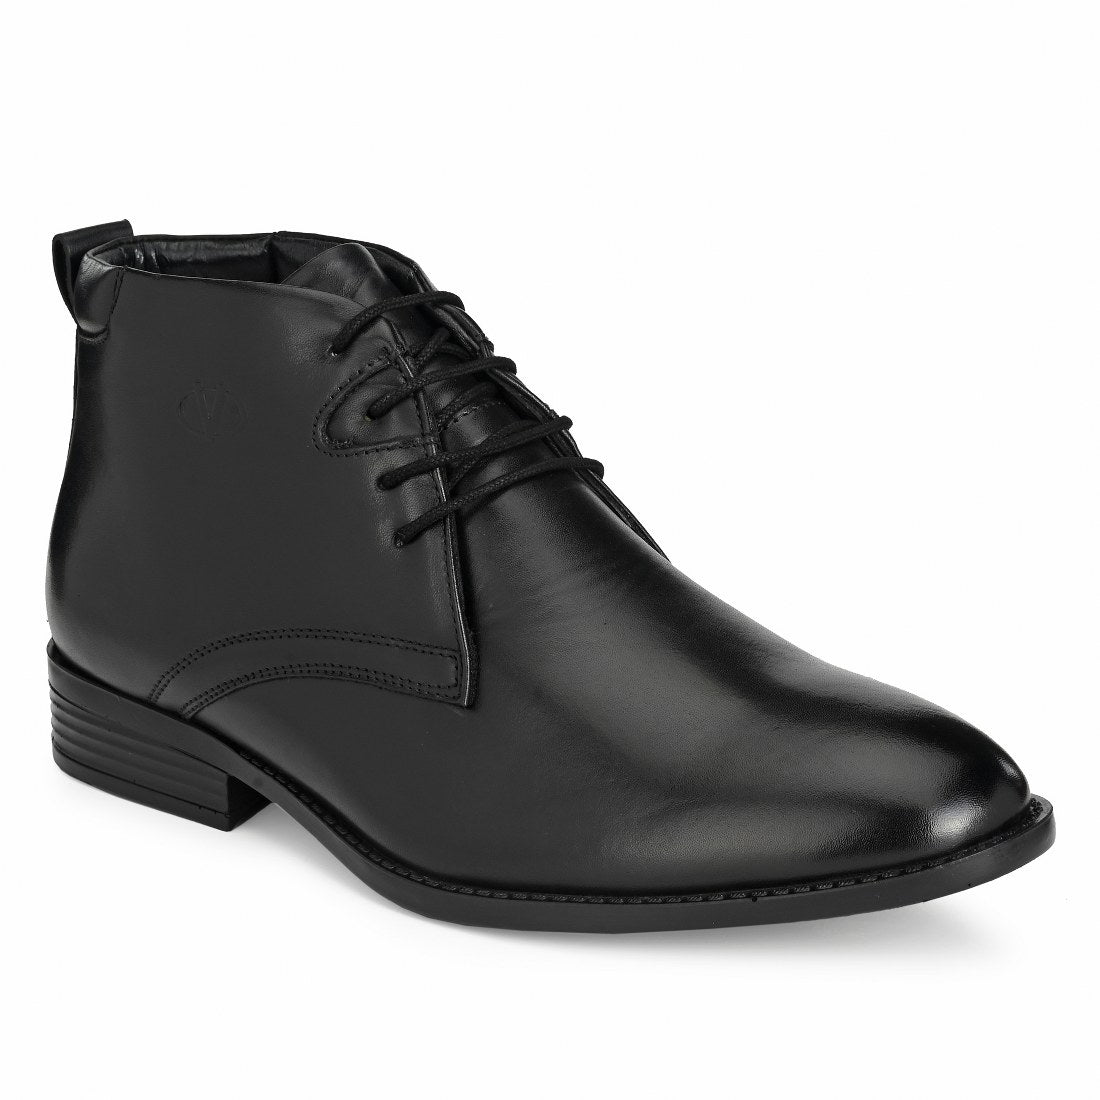 AMAZONA-75B MEN LEATHER BLACK FORMAL BOOT ANKLE DERBY